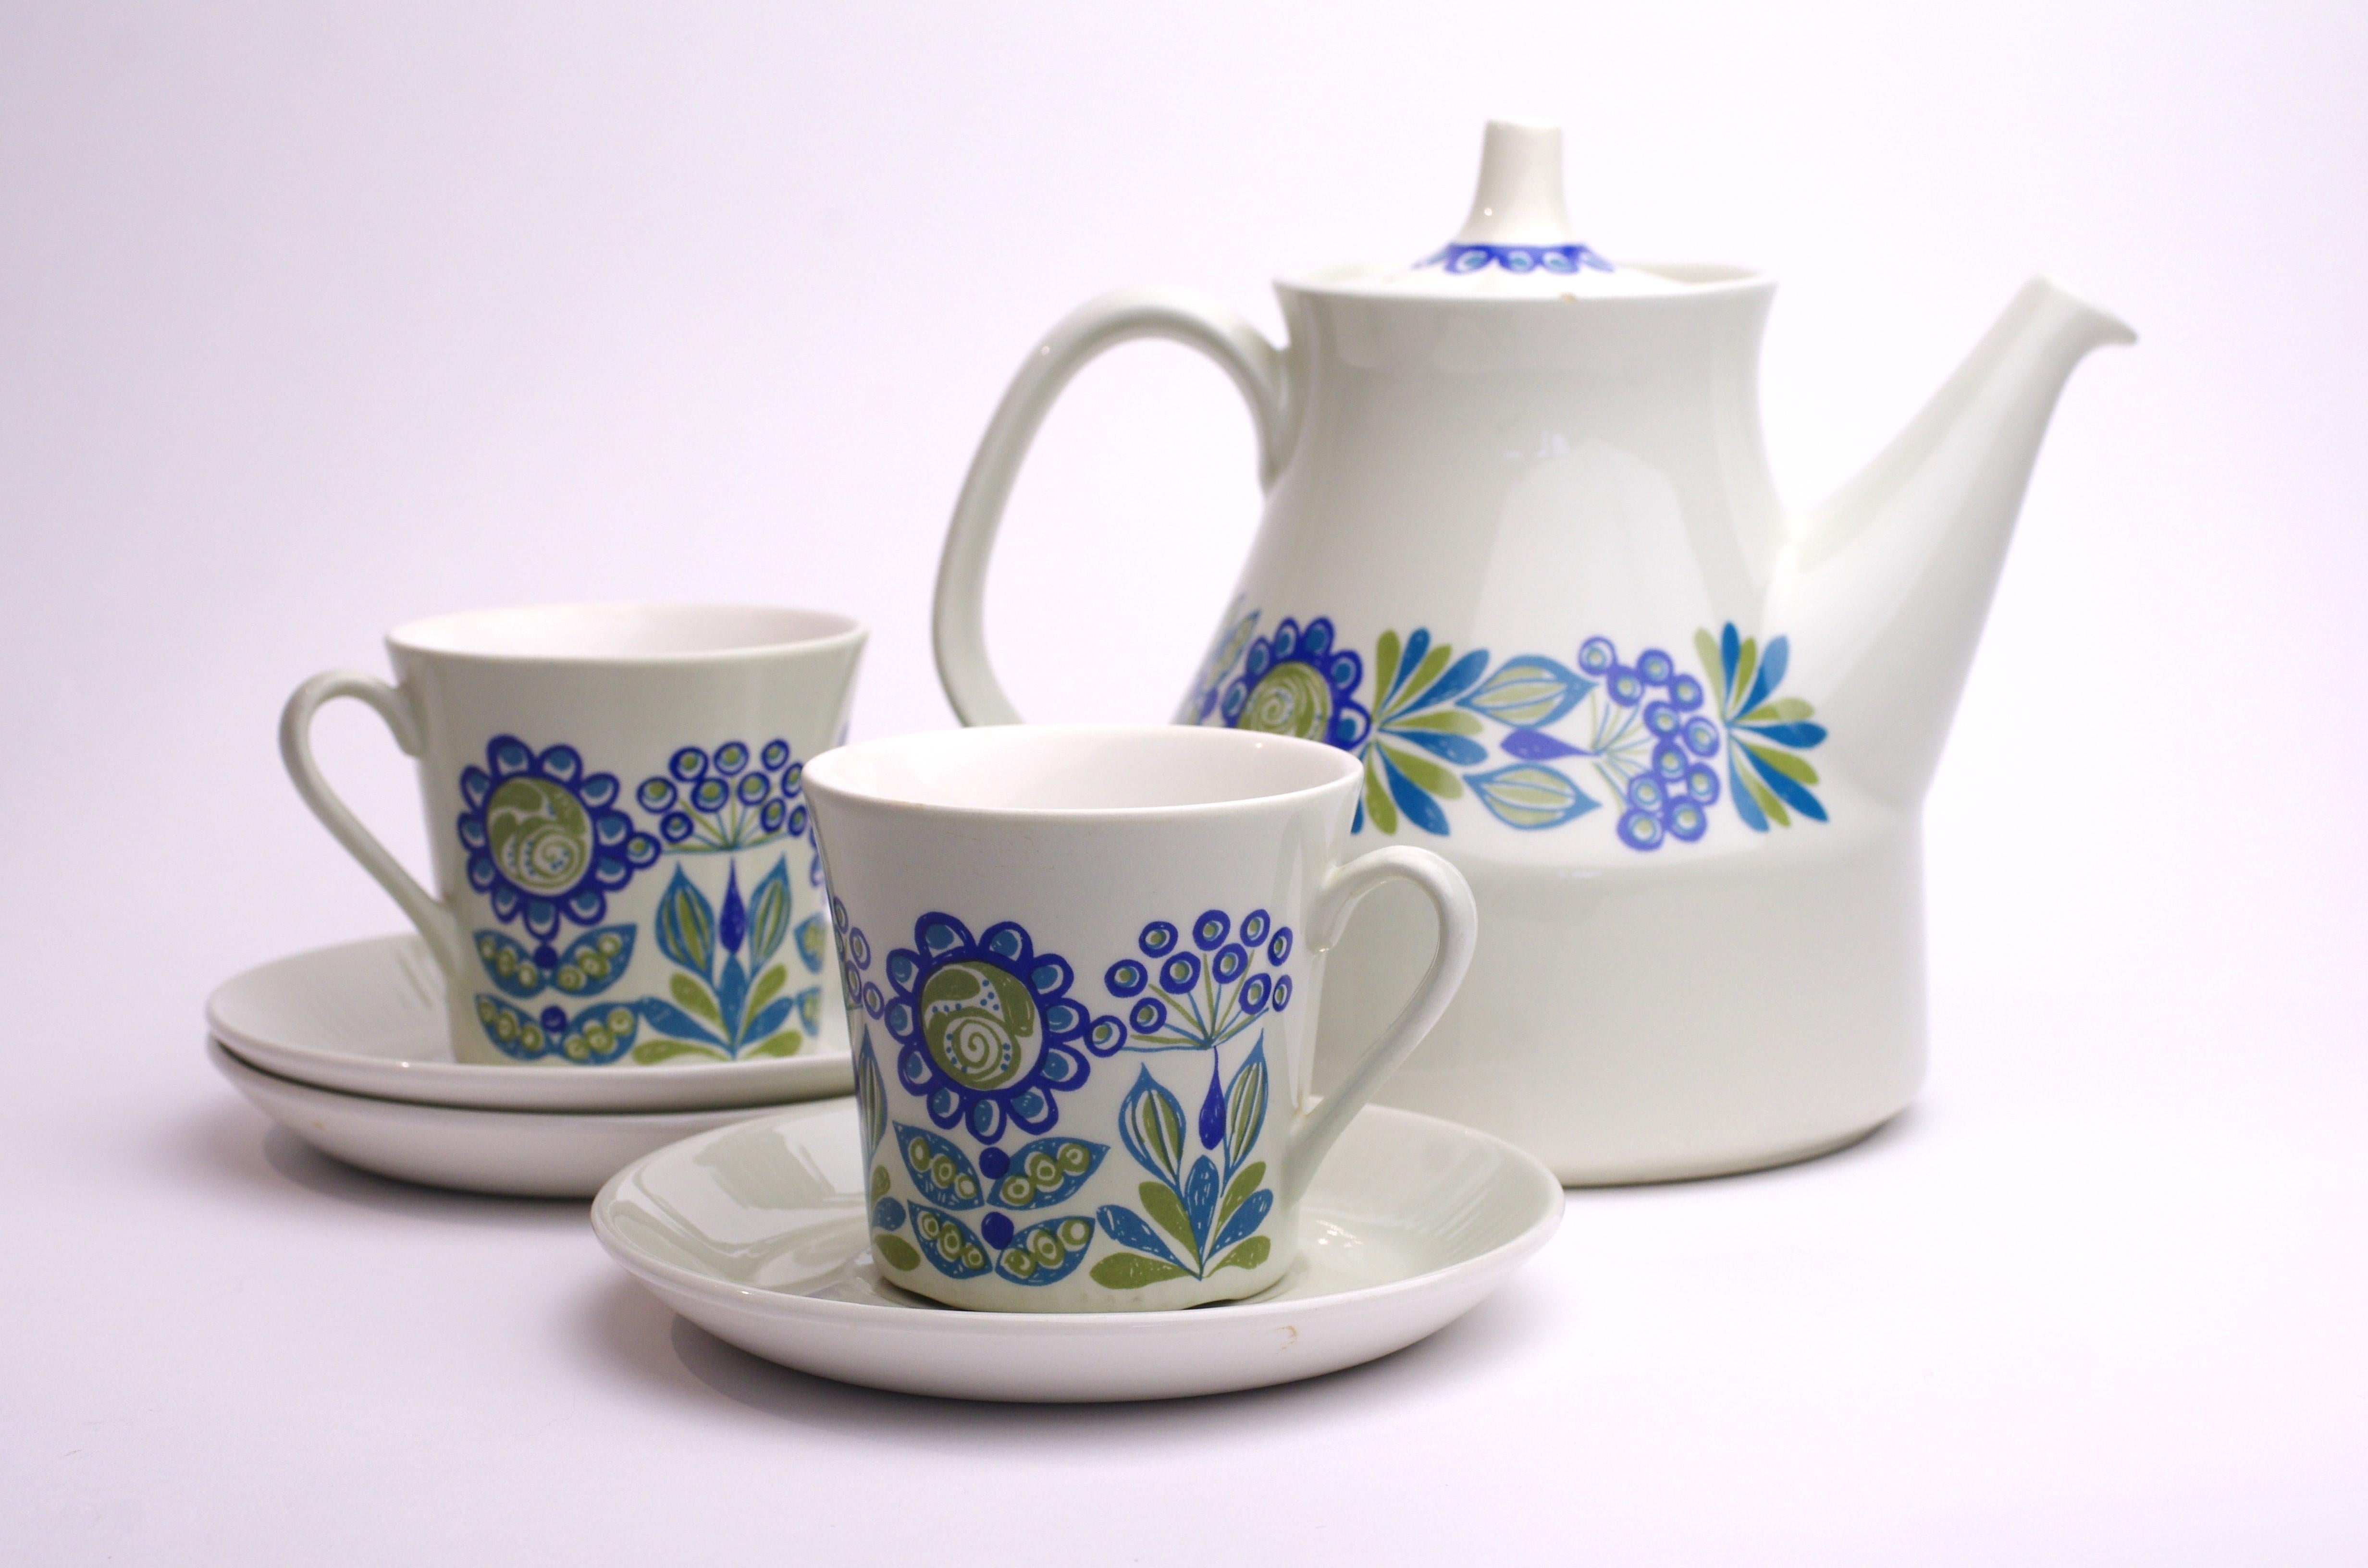 Product Description:
This teaset has been designed by Turi Gramstad Oliver who since 1960 was responsible for quite a few famous designs at the Figgjo factory. Designs from her hand include: Daisy, Elvira, Market, Lotte, Tor Viking en Clúpea. The